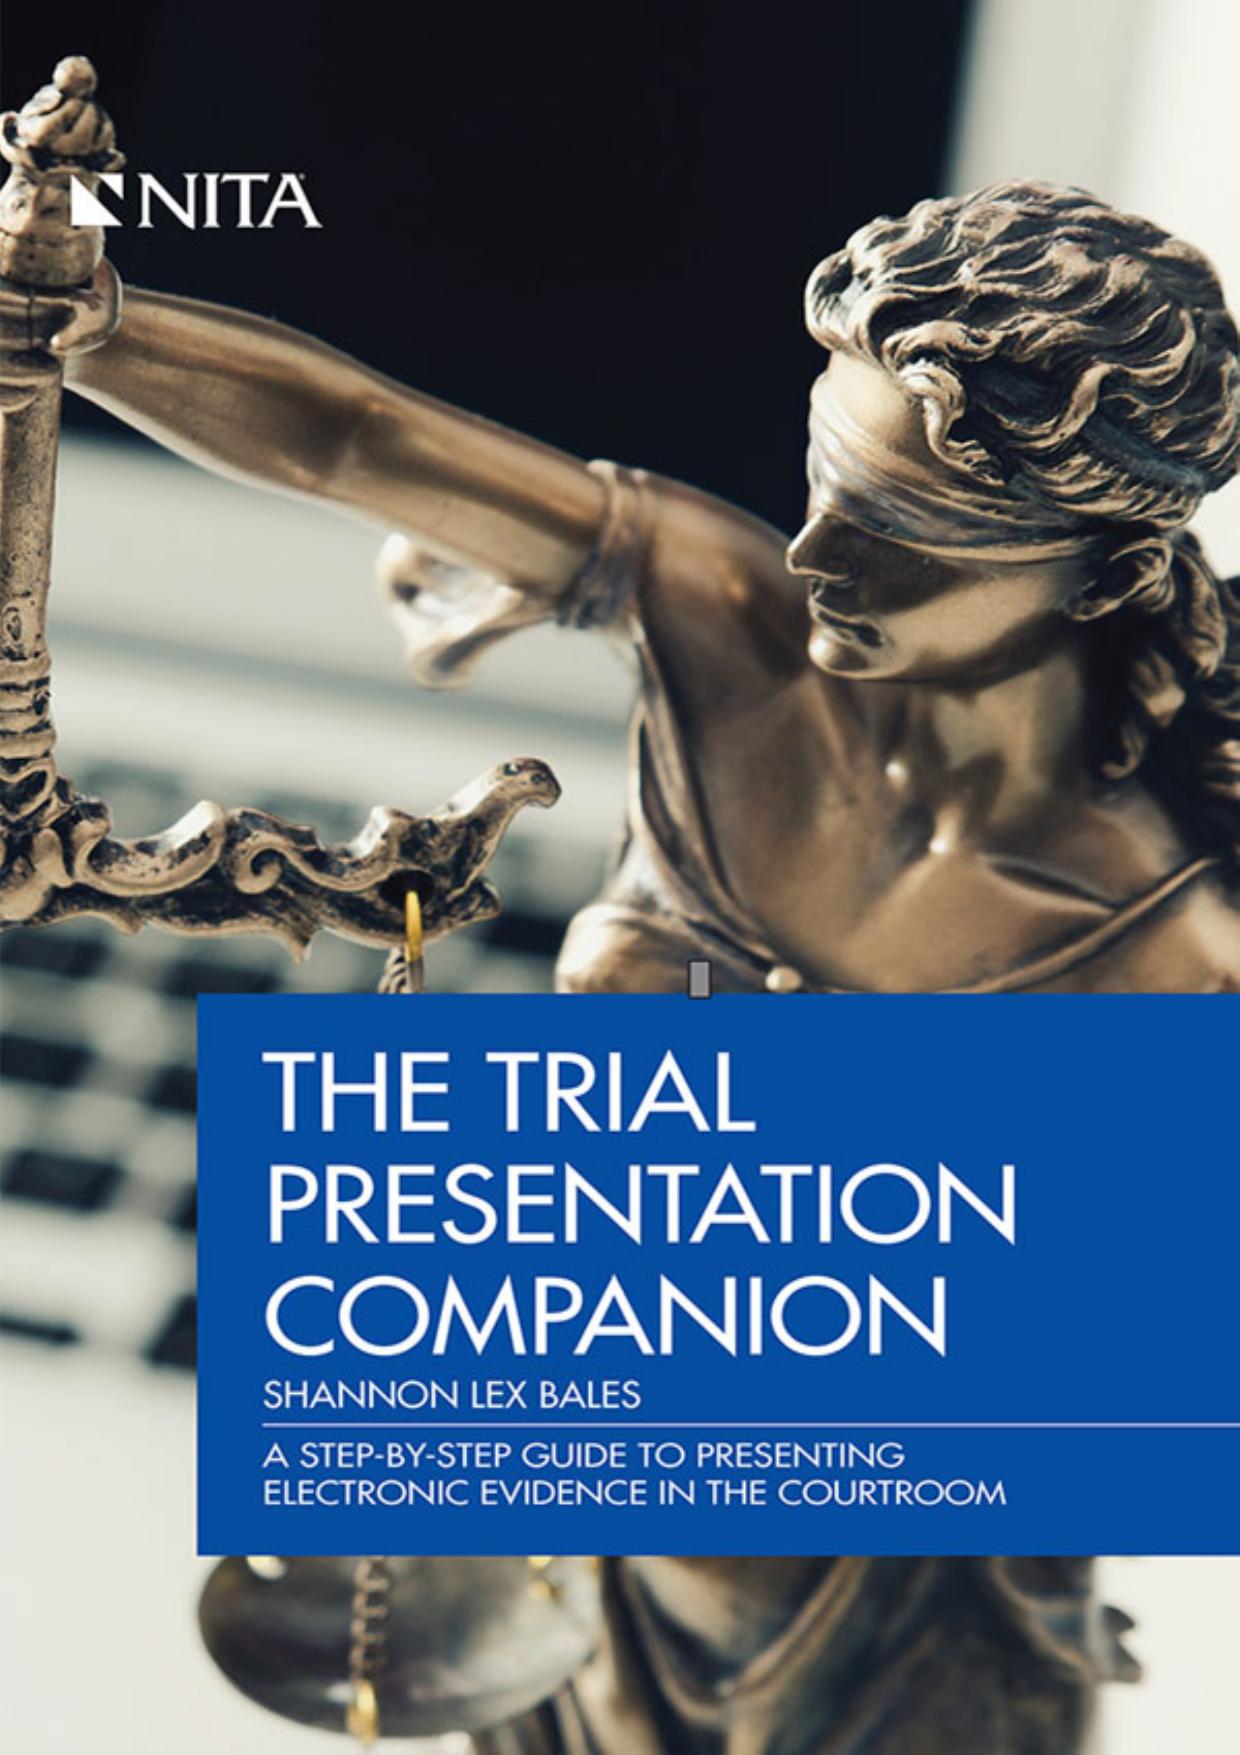 The Trial Presentation Companion: A Step-By-Step Guide to Presenting Electronic Evidence in the Courtroom  by Shannon Lex Bales